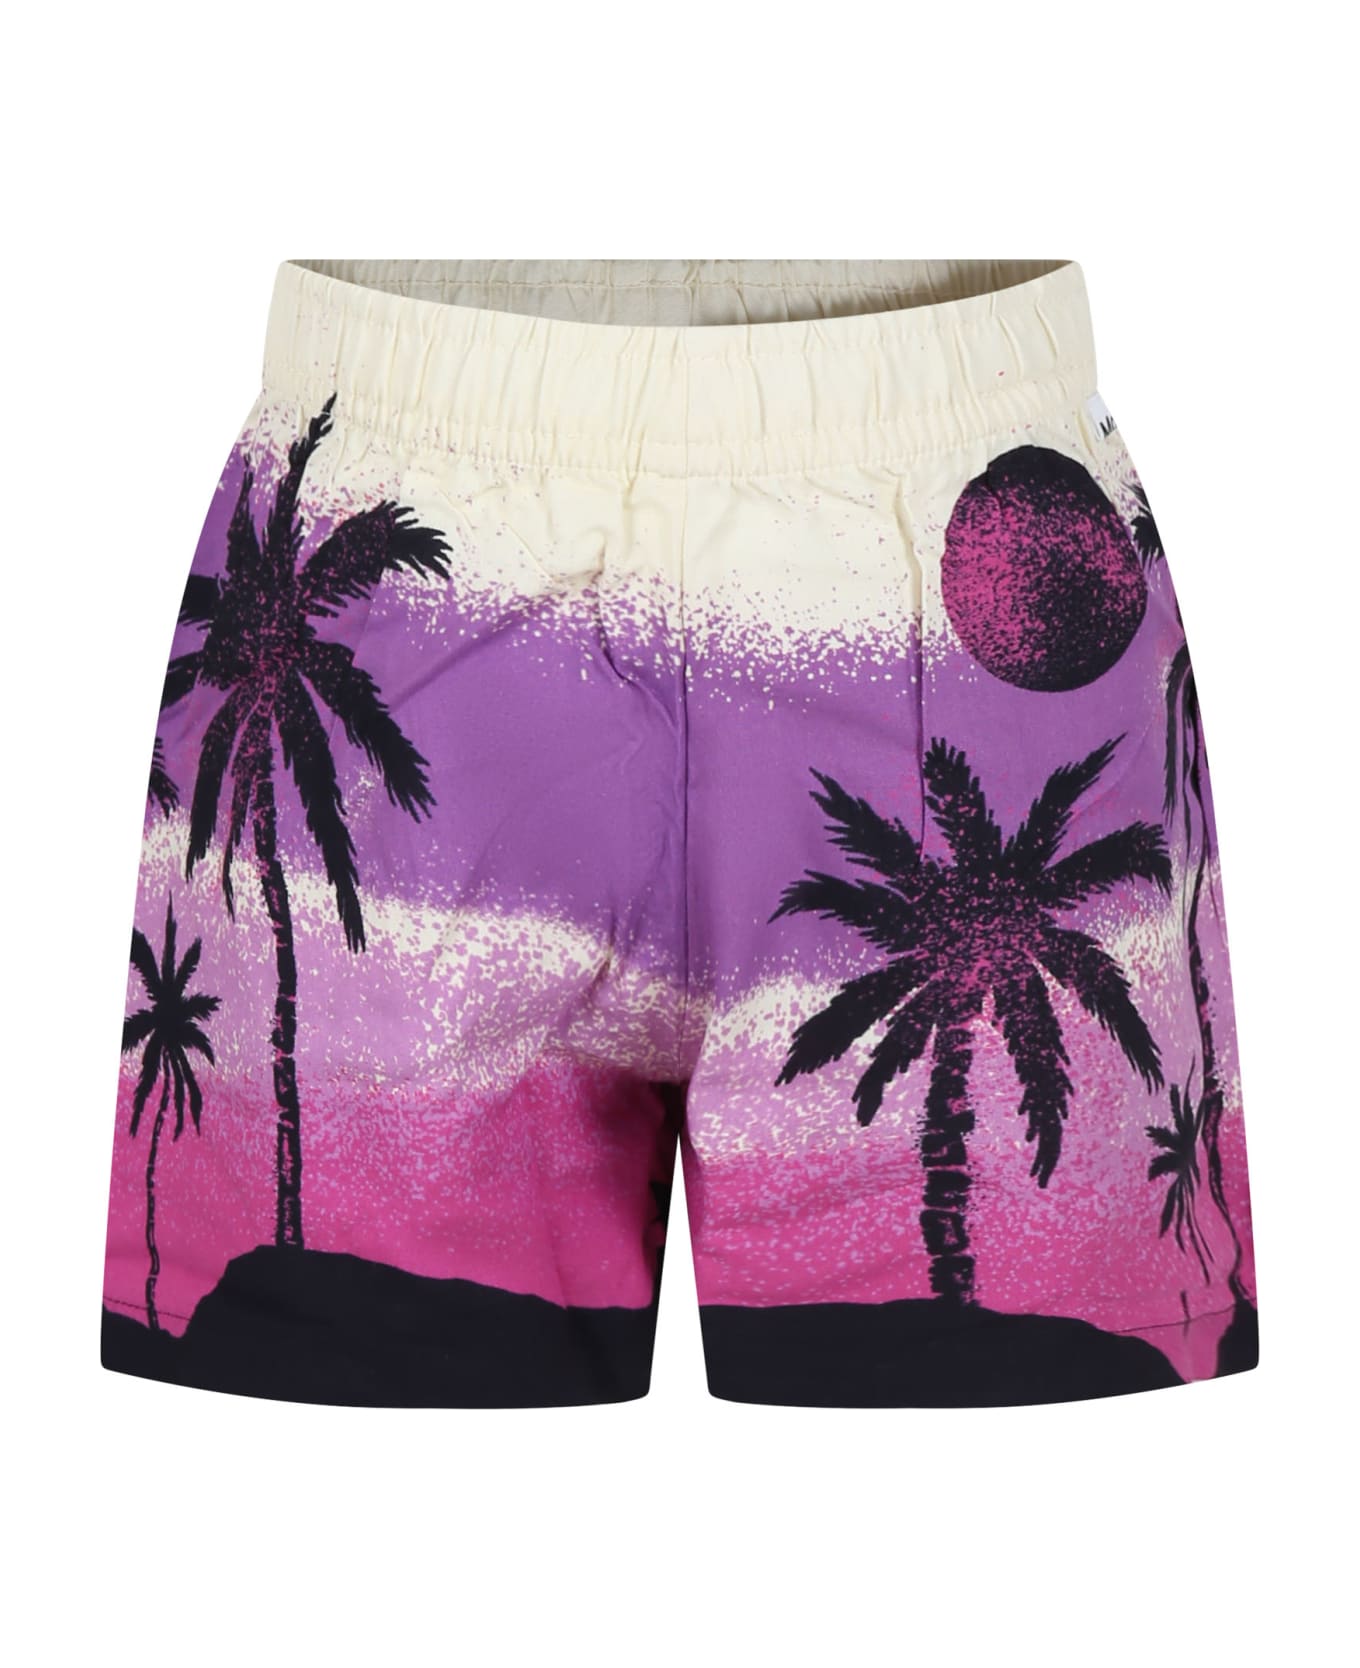 Molo Ivory Shorts For Girl With Palm Print - Multicolor ボトムス